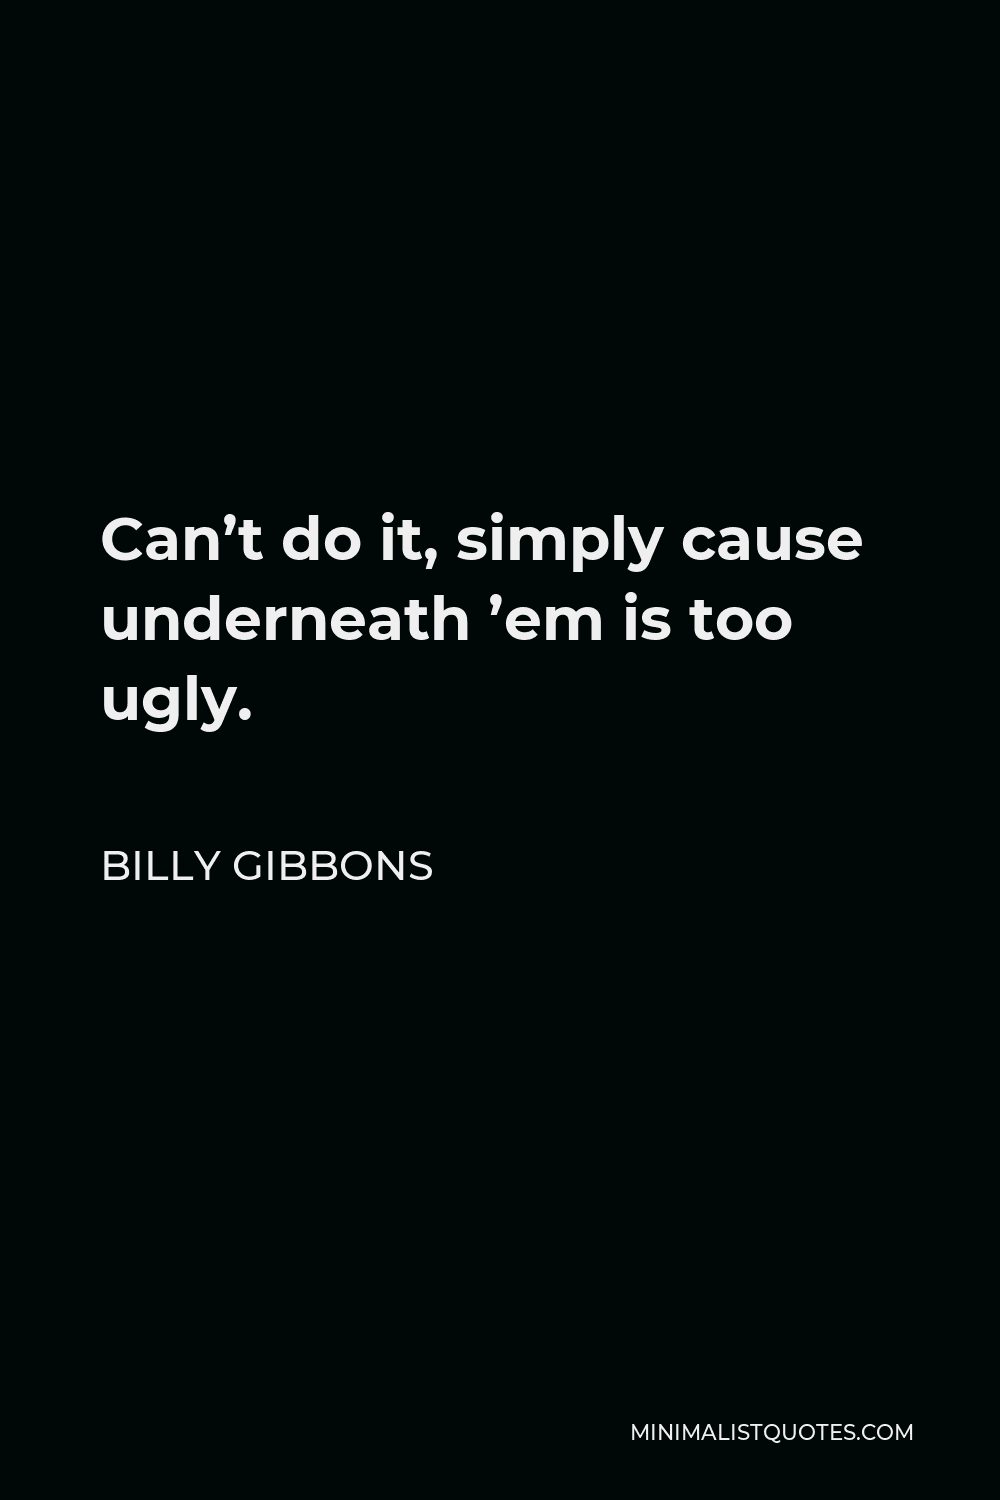 Billy Gibbons Quote - Can’t do it, simply cause underneath ’em is too ugly.